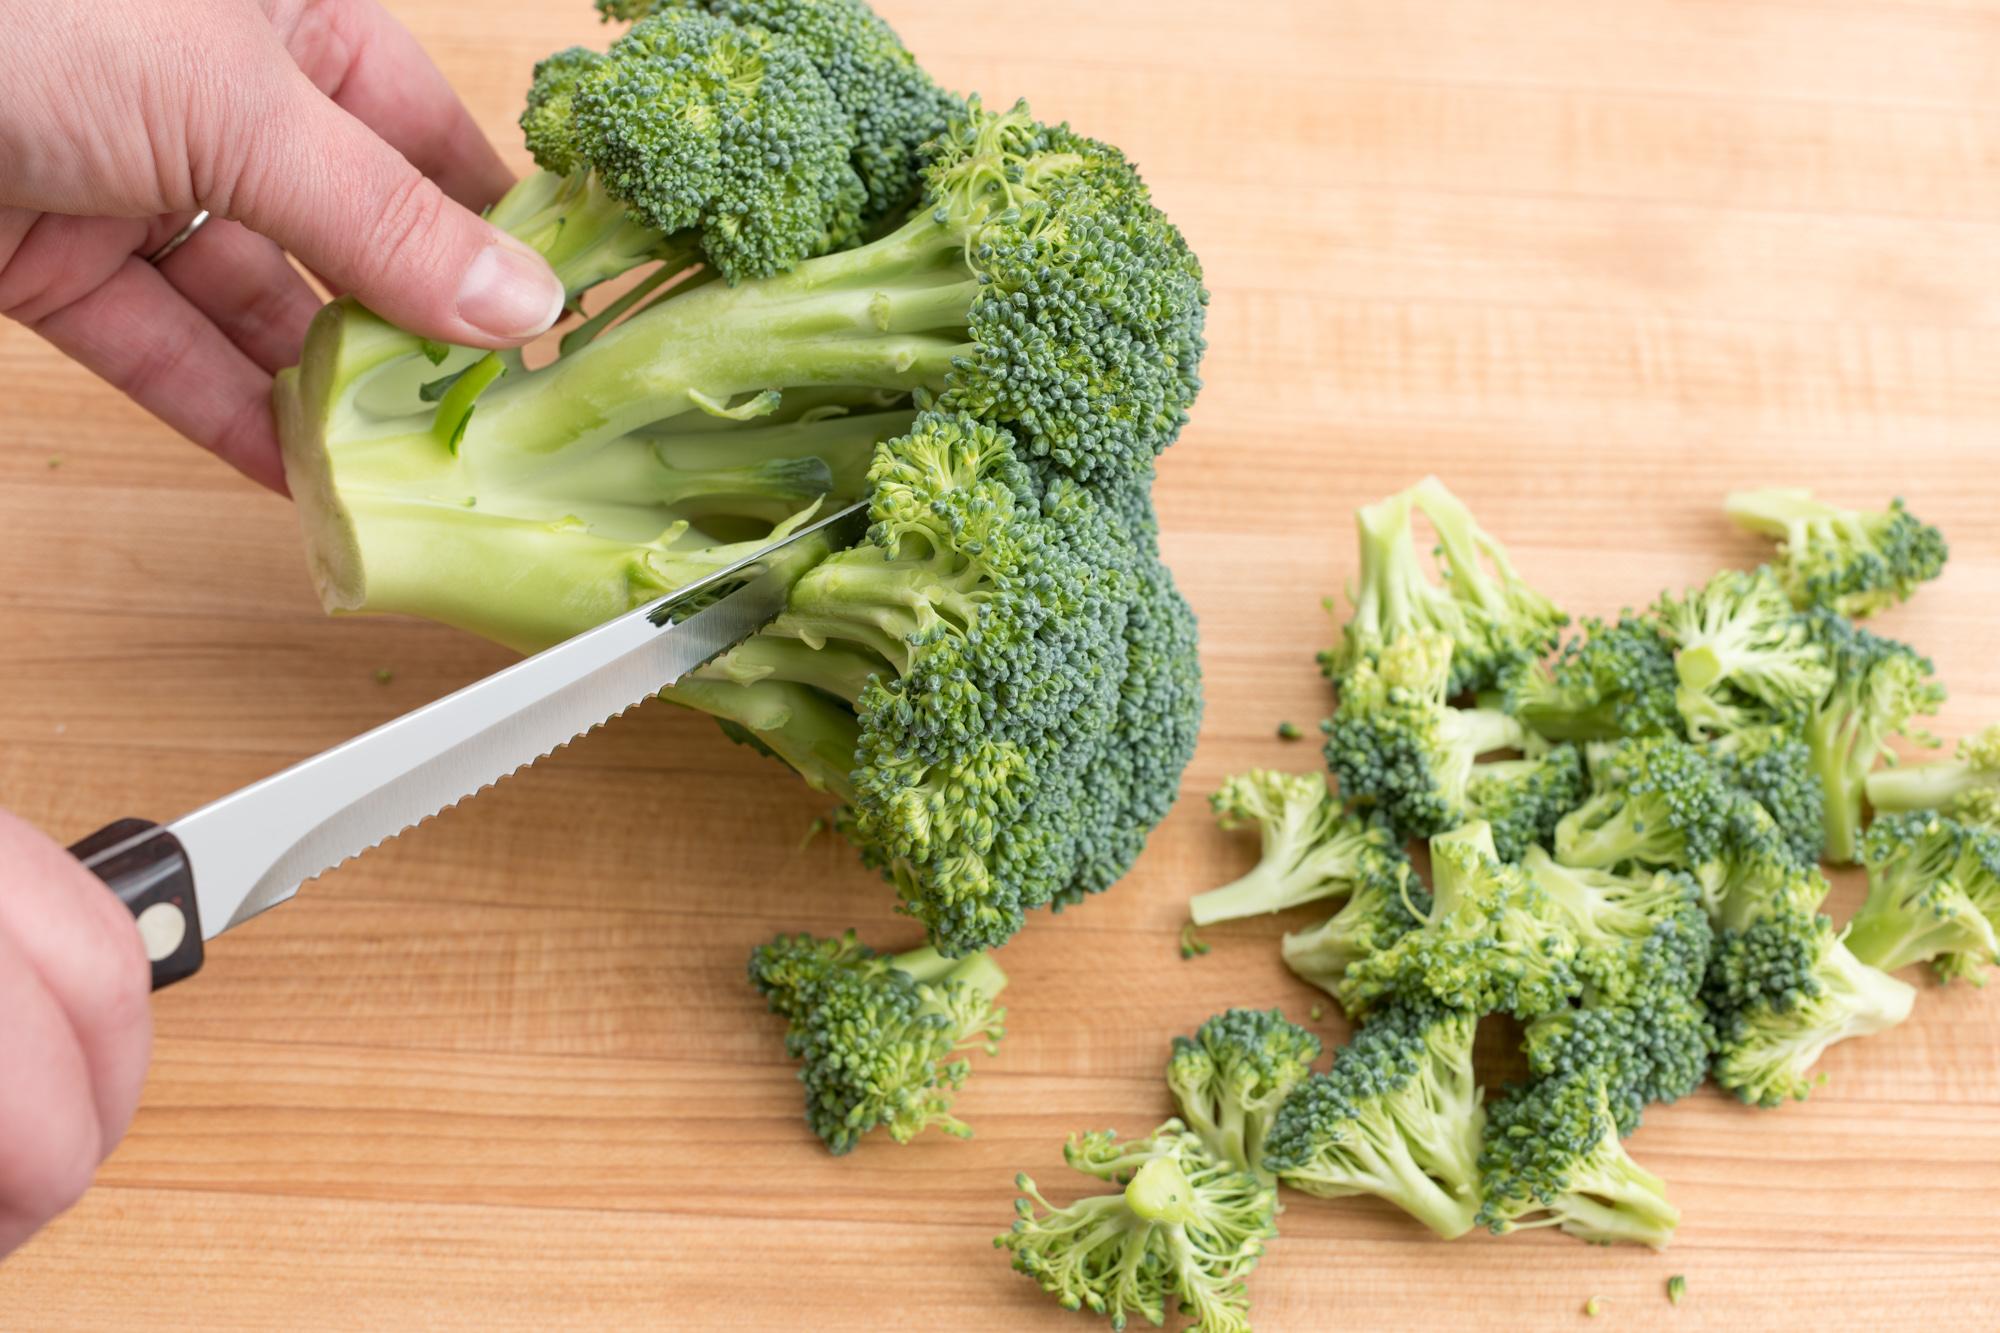 Trimming the broccoli with a Trimmer.